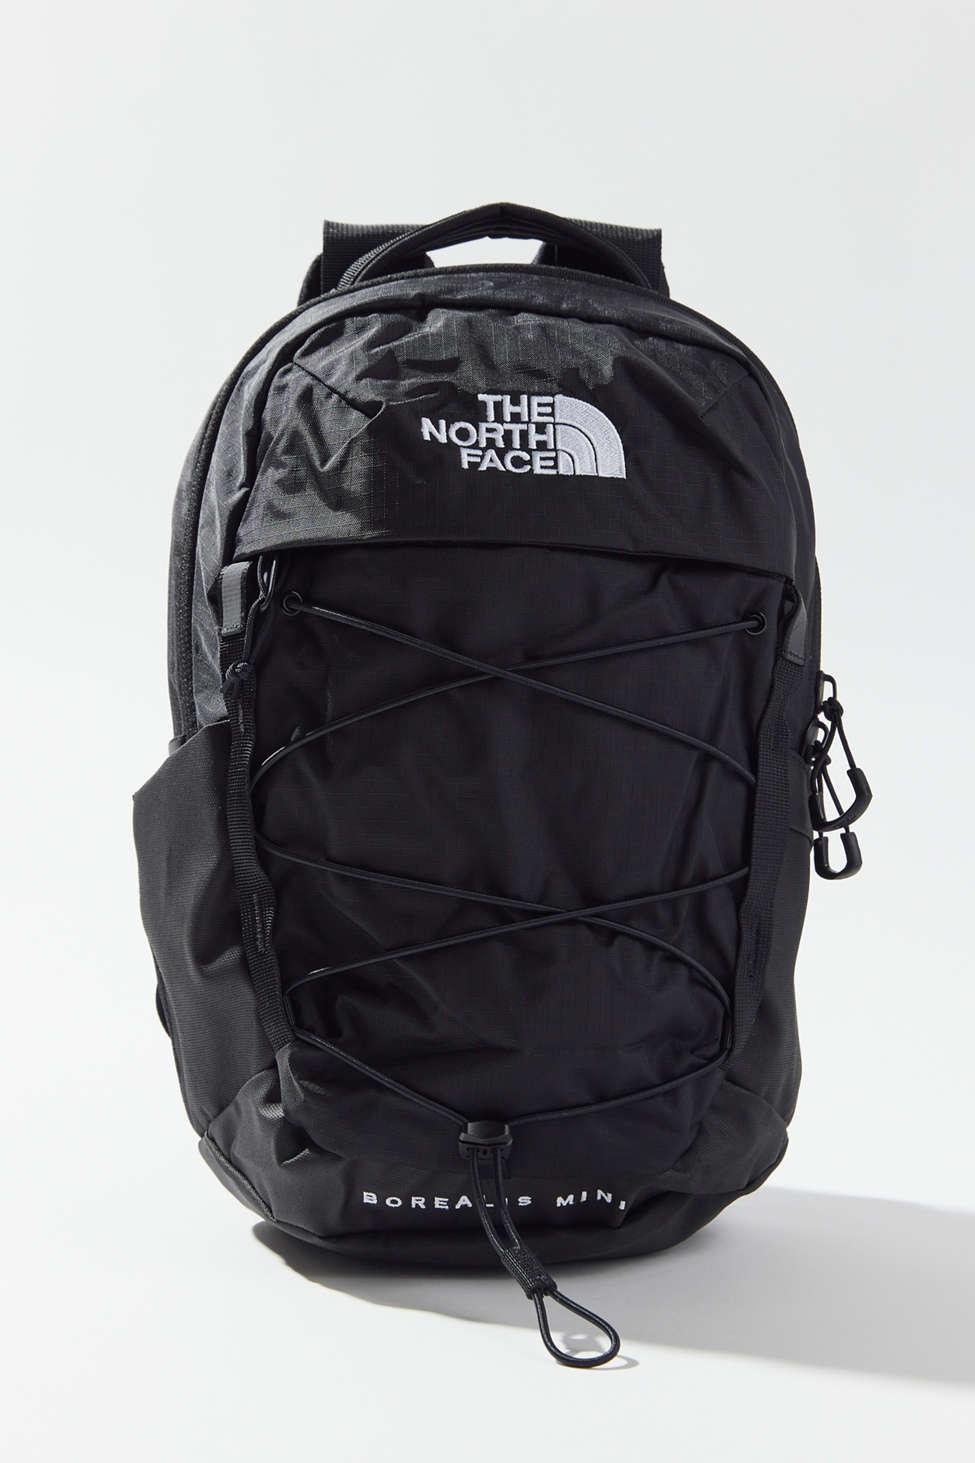 The North Face Borealis Mini Backpack in Black | Lyst